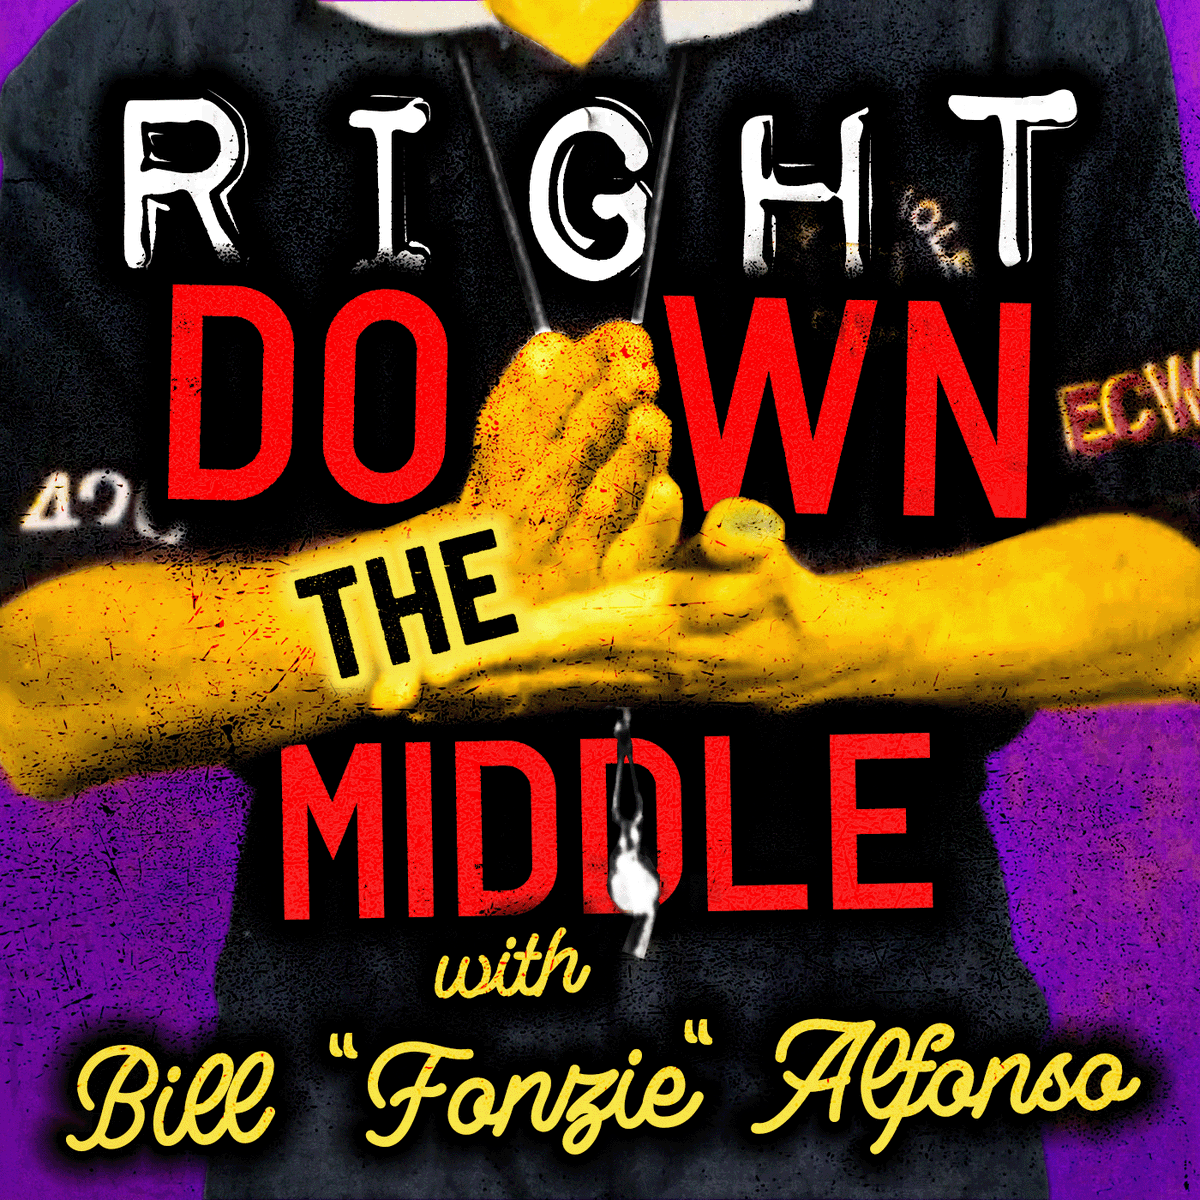 🚨 Another DAM cool announcement on 4/20 🚨 Coming to RVD TV is #RightDownTheMiddle with @AlfonsoBill! Join Fonzie for a new series set to debut in May, daddy! Be sure to subscribe to RVDTV.com! #ECW @RVDPod